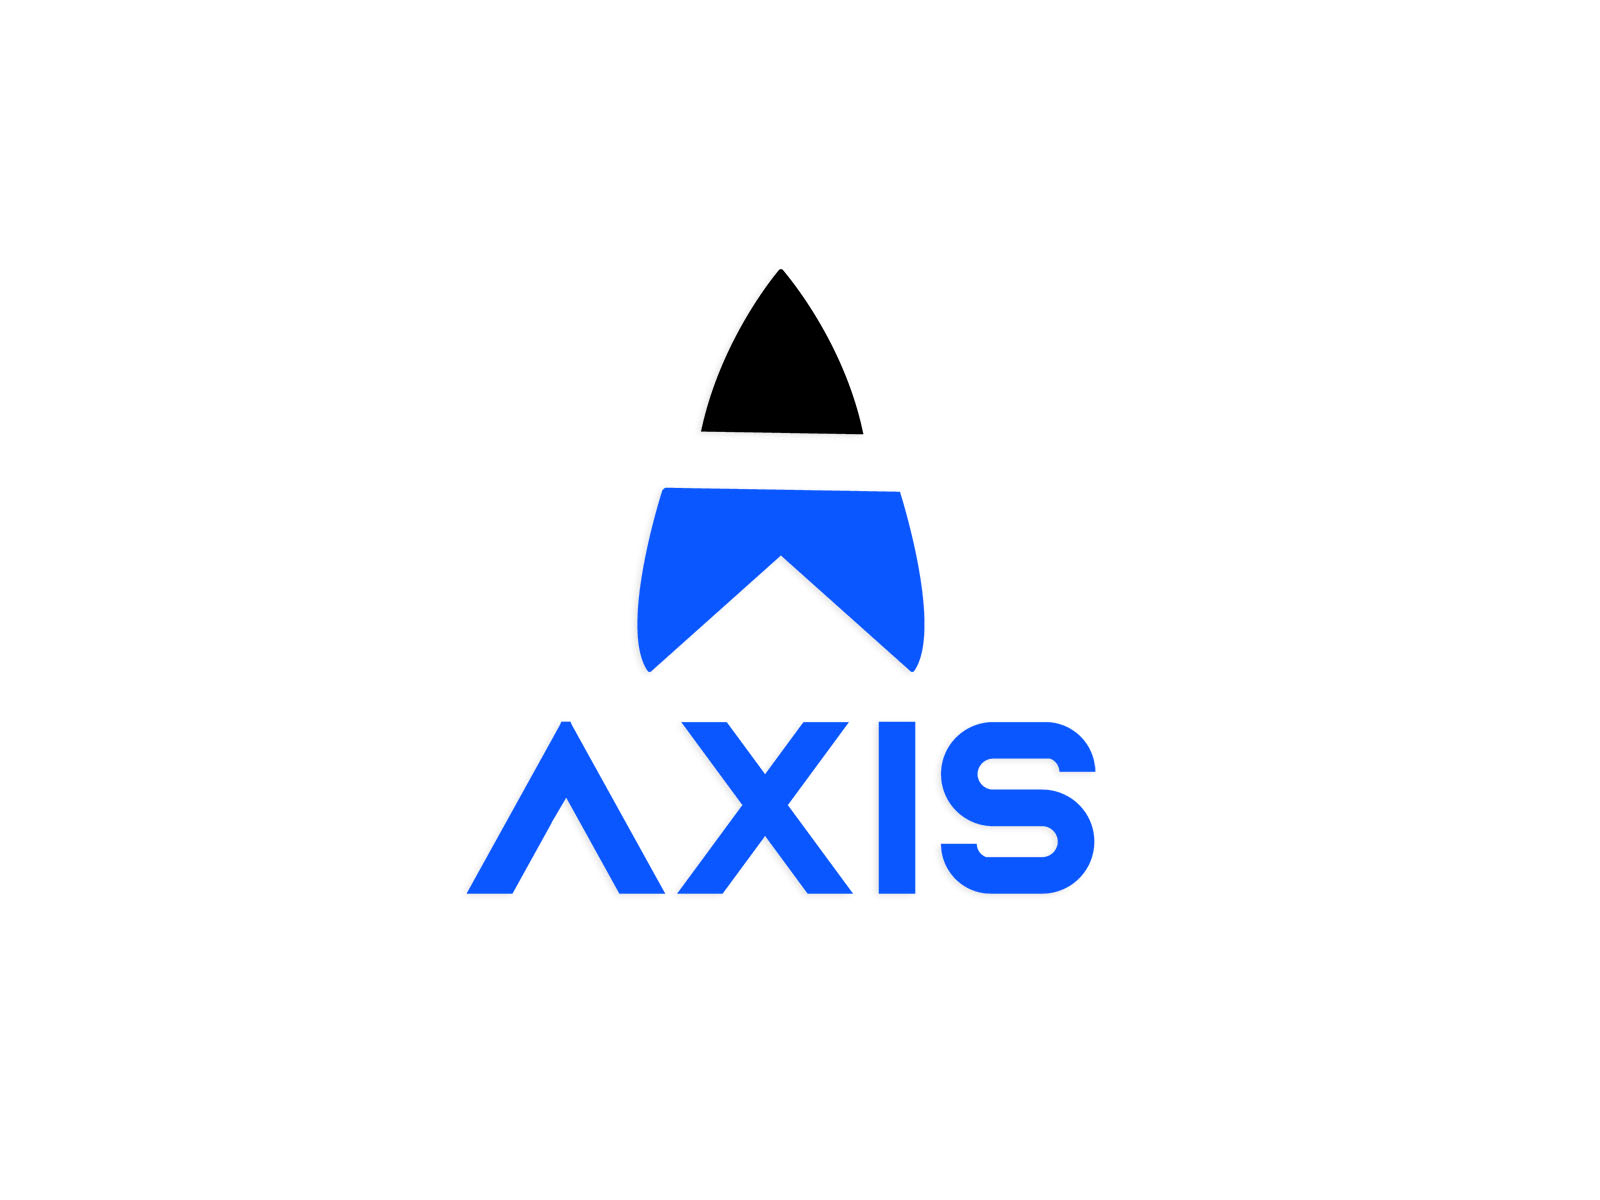 Axis Logo Design by Ethan Gonsalves on Dribbble